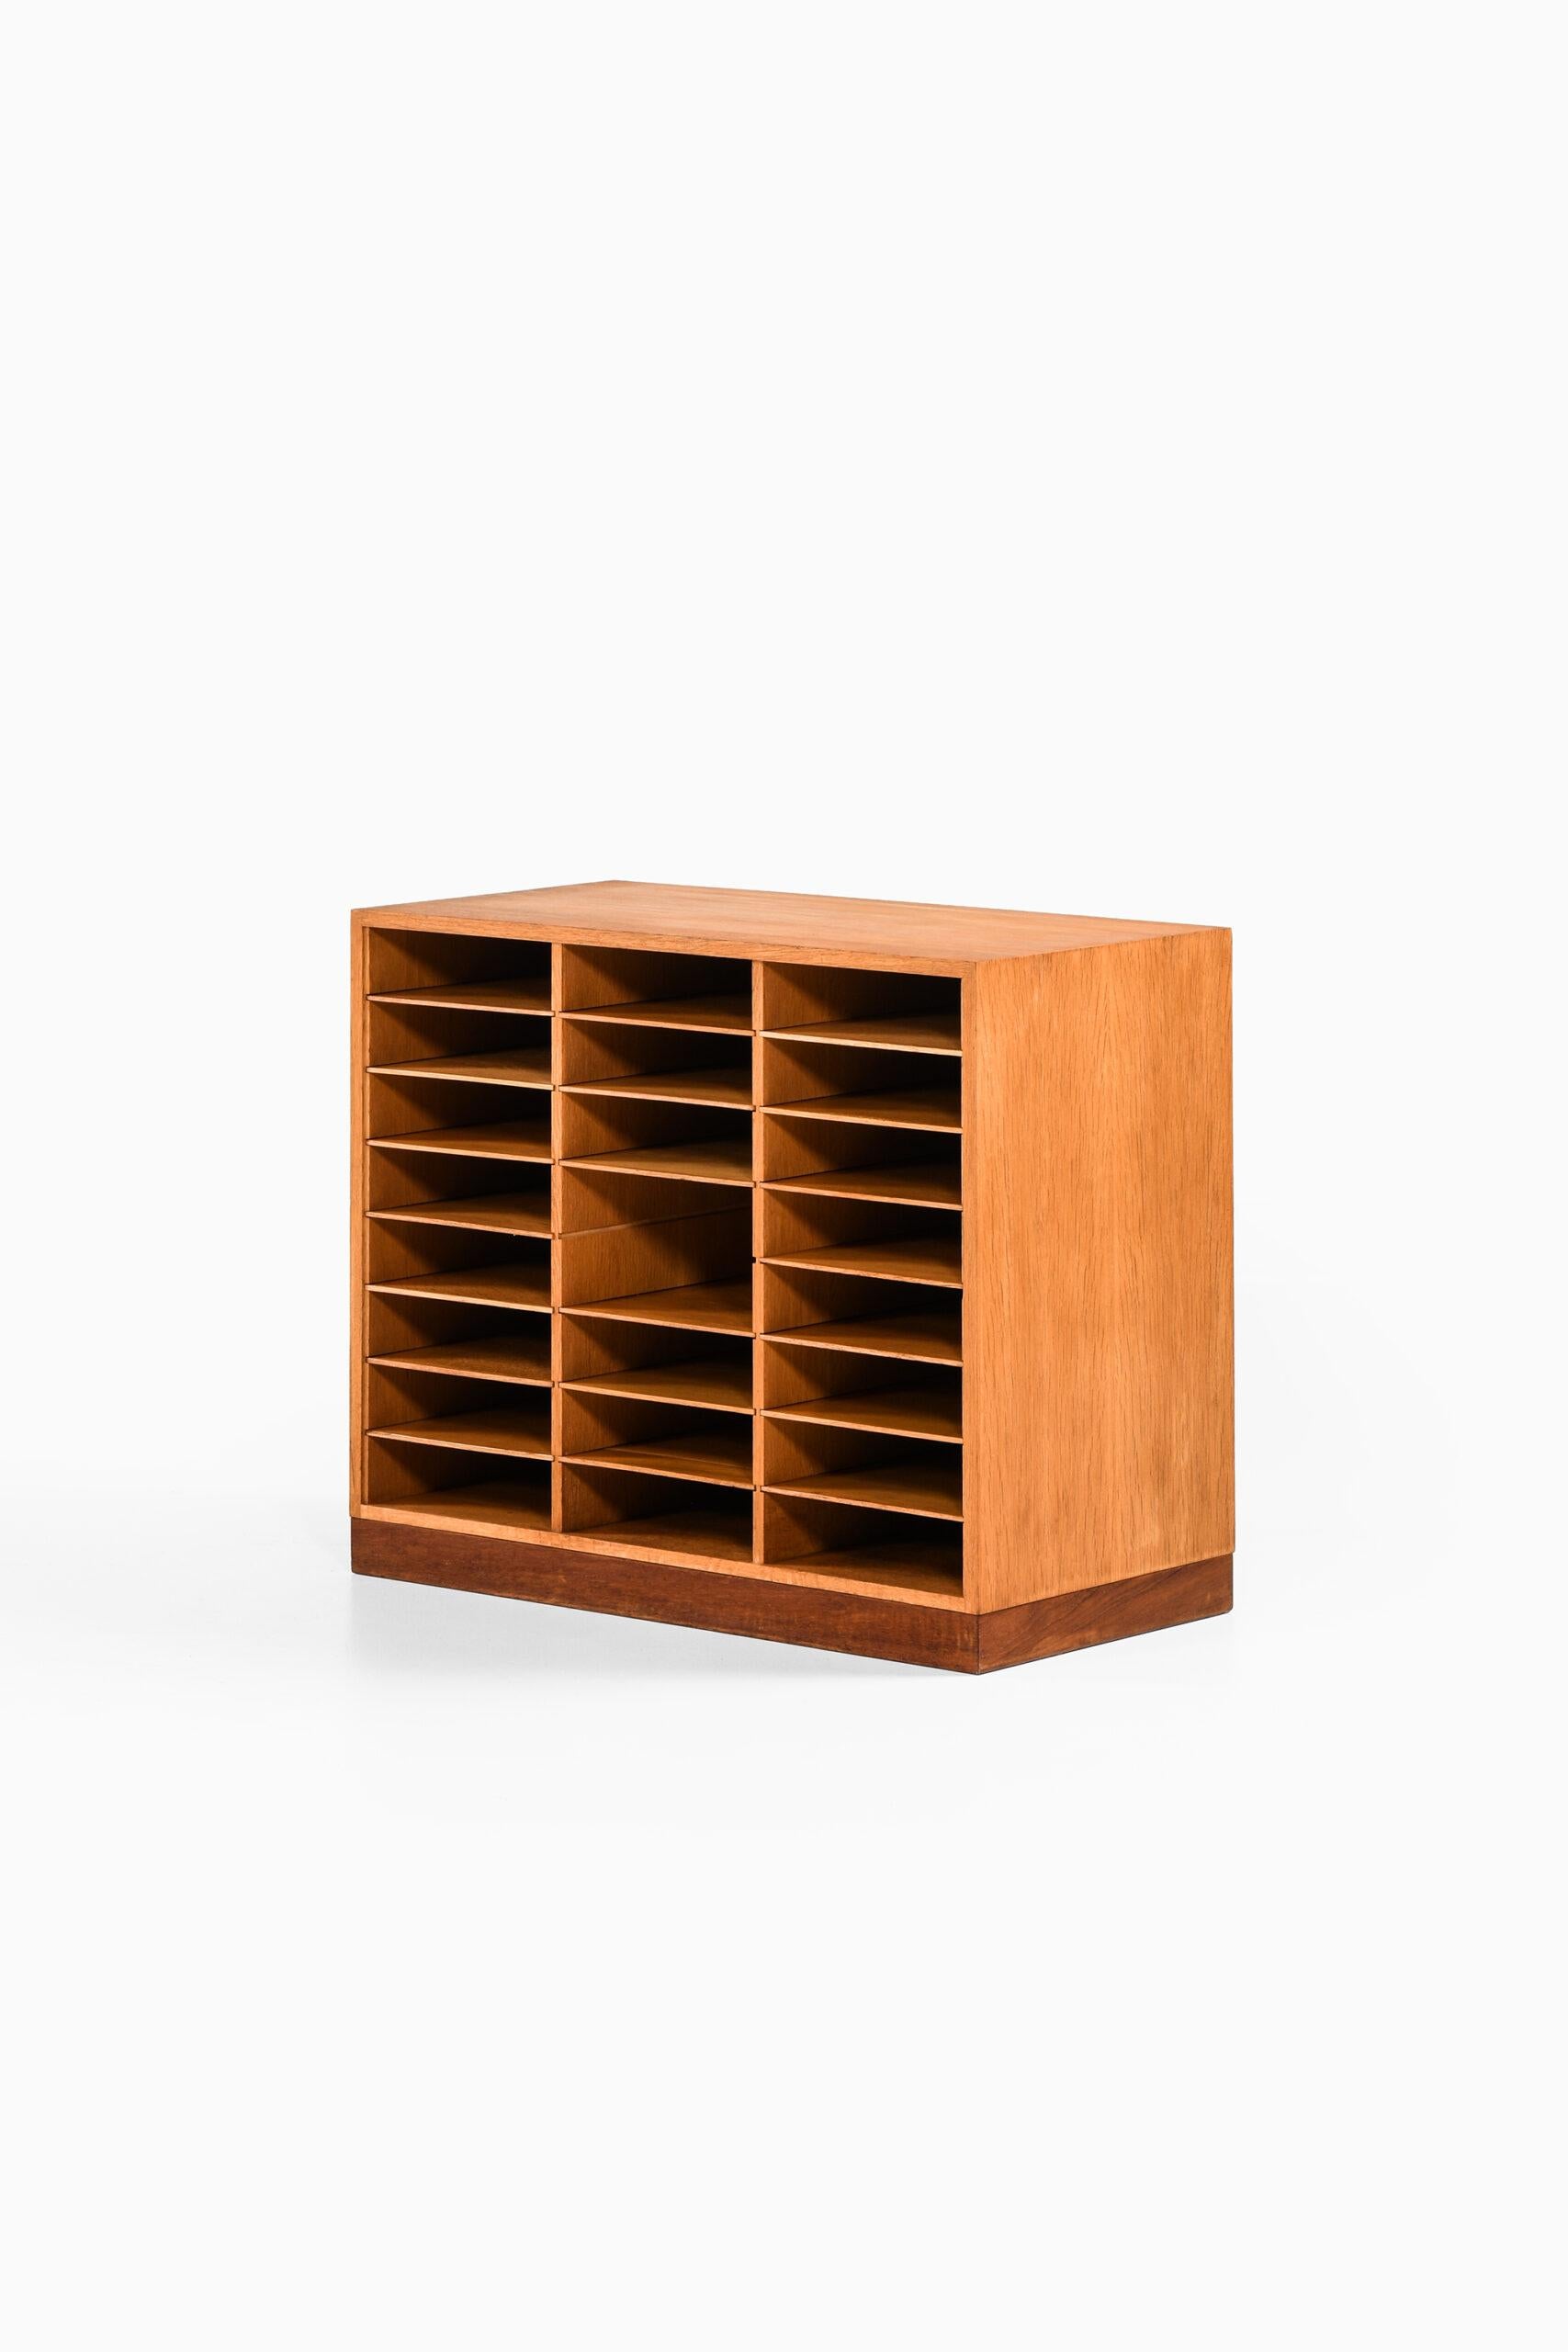 Mid-20th Century File Cabinet Attributed to Arne Vodder Produced by Vamo Sønderborg in Denmark For Sale